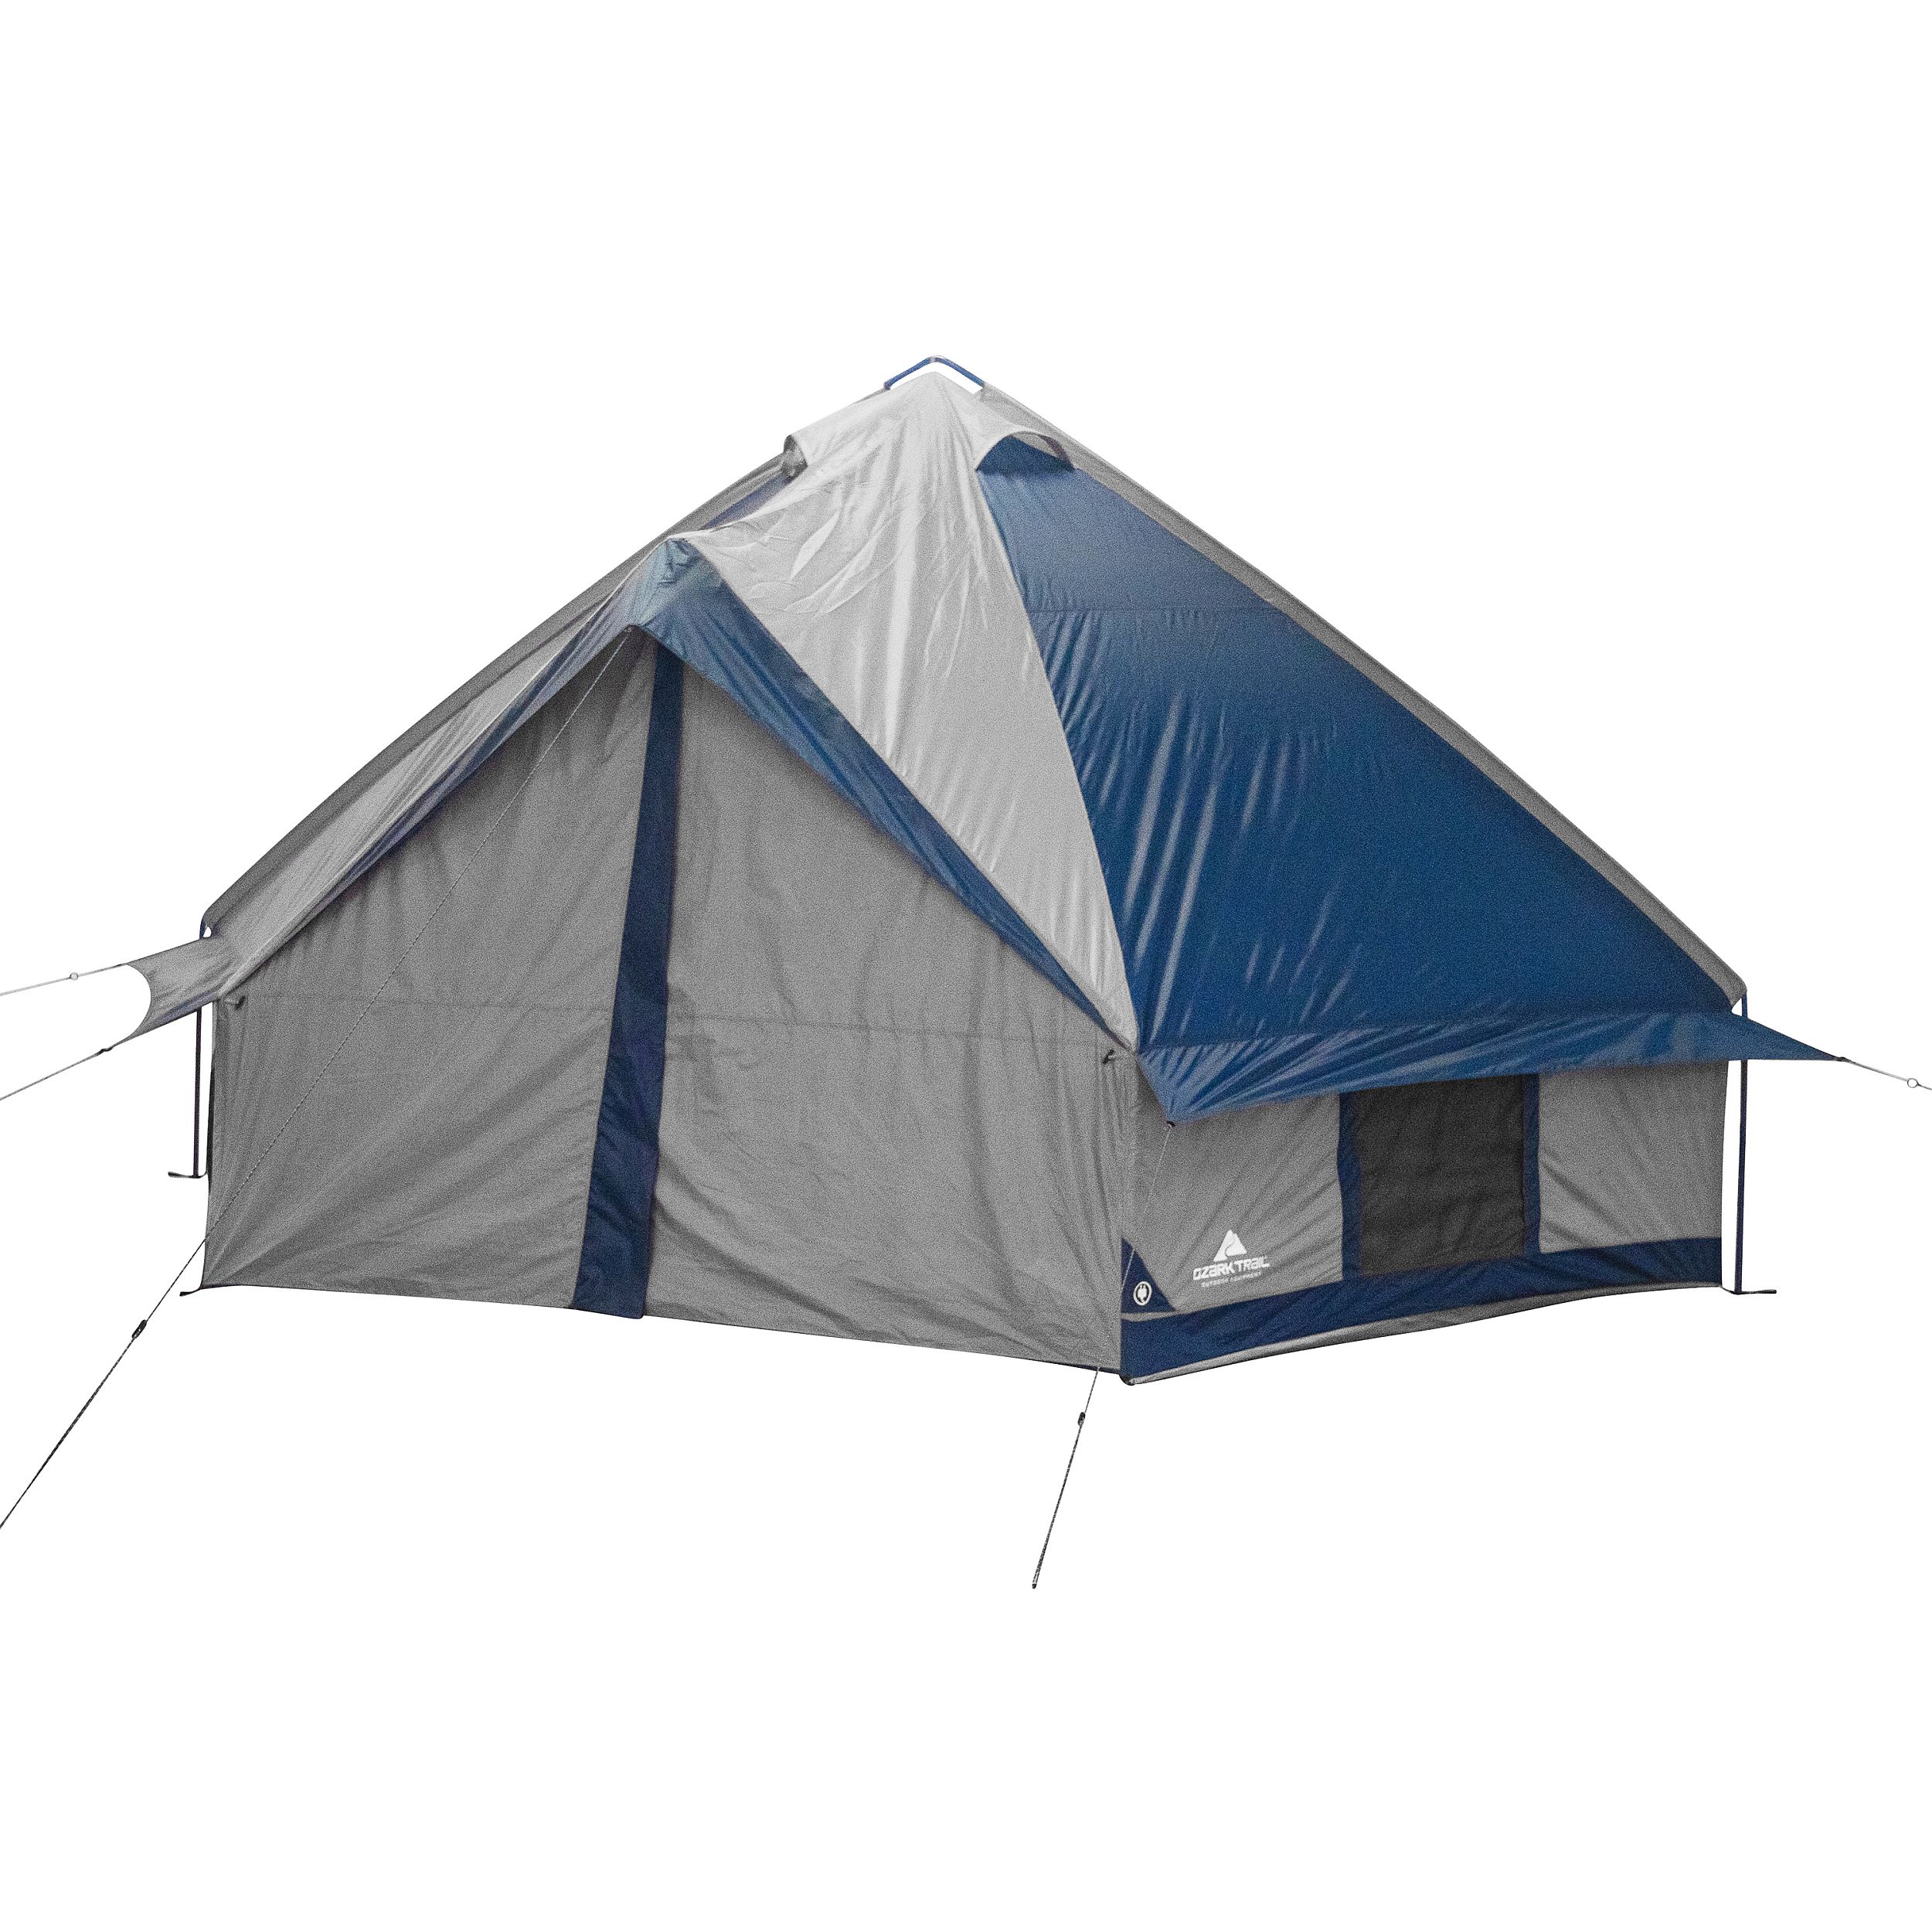 Ozark Trail Crystal Caverns 10-Person Festival Tent, with 2 Entrances - image 5 of 10